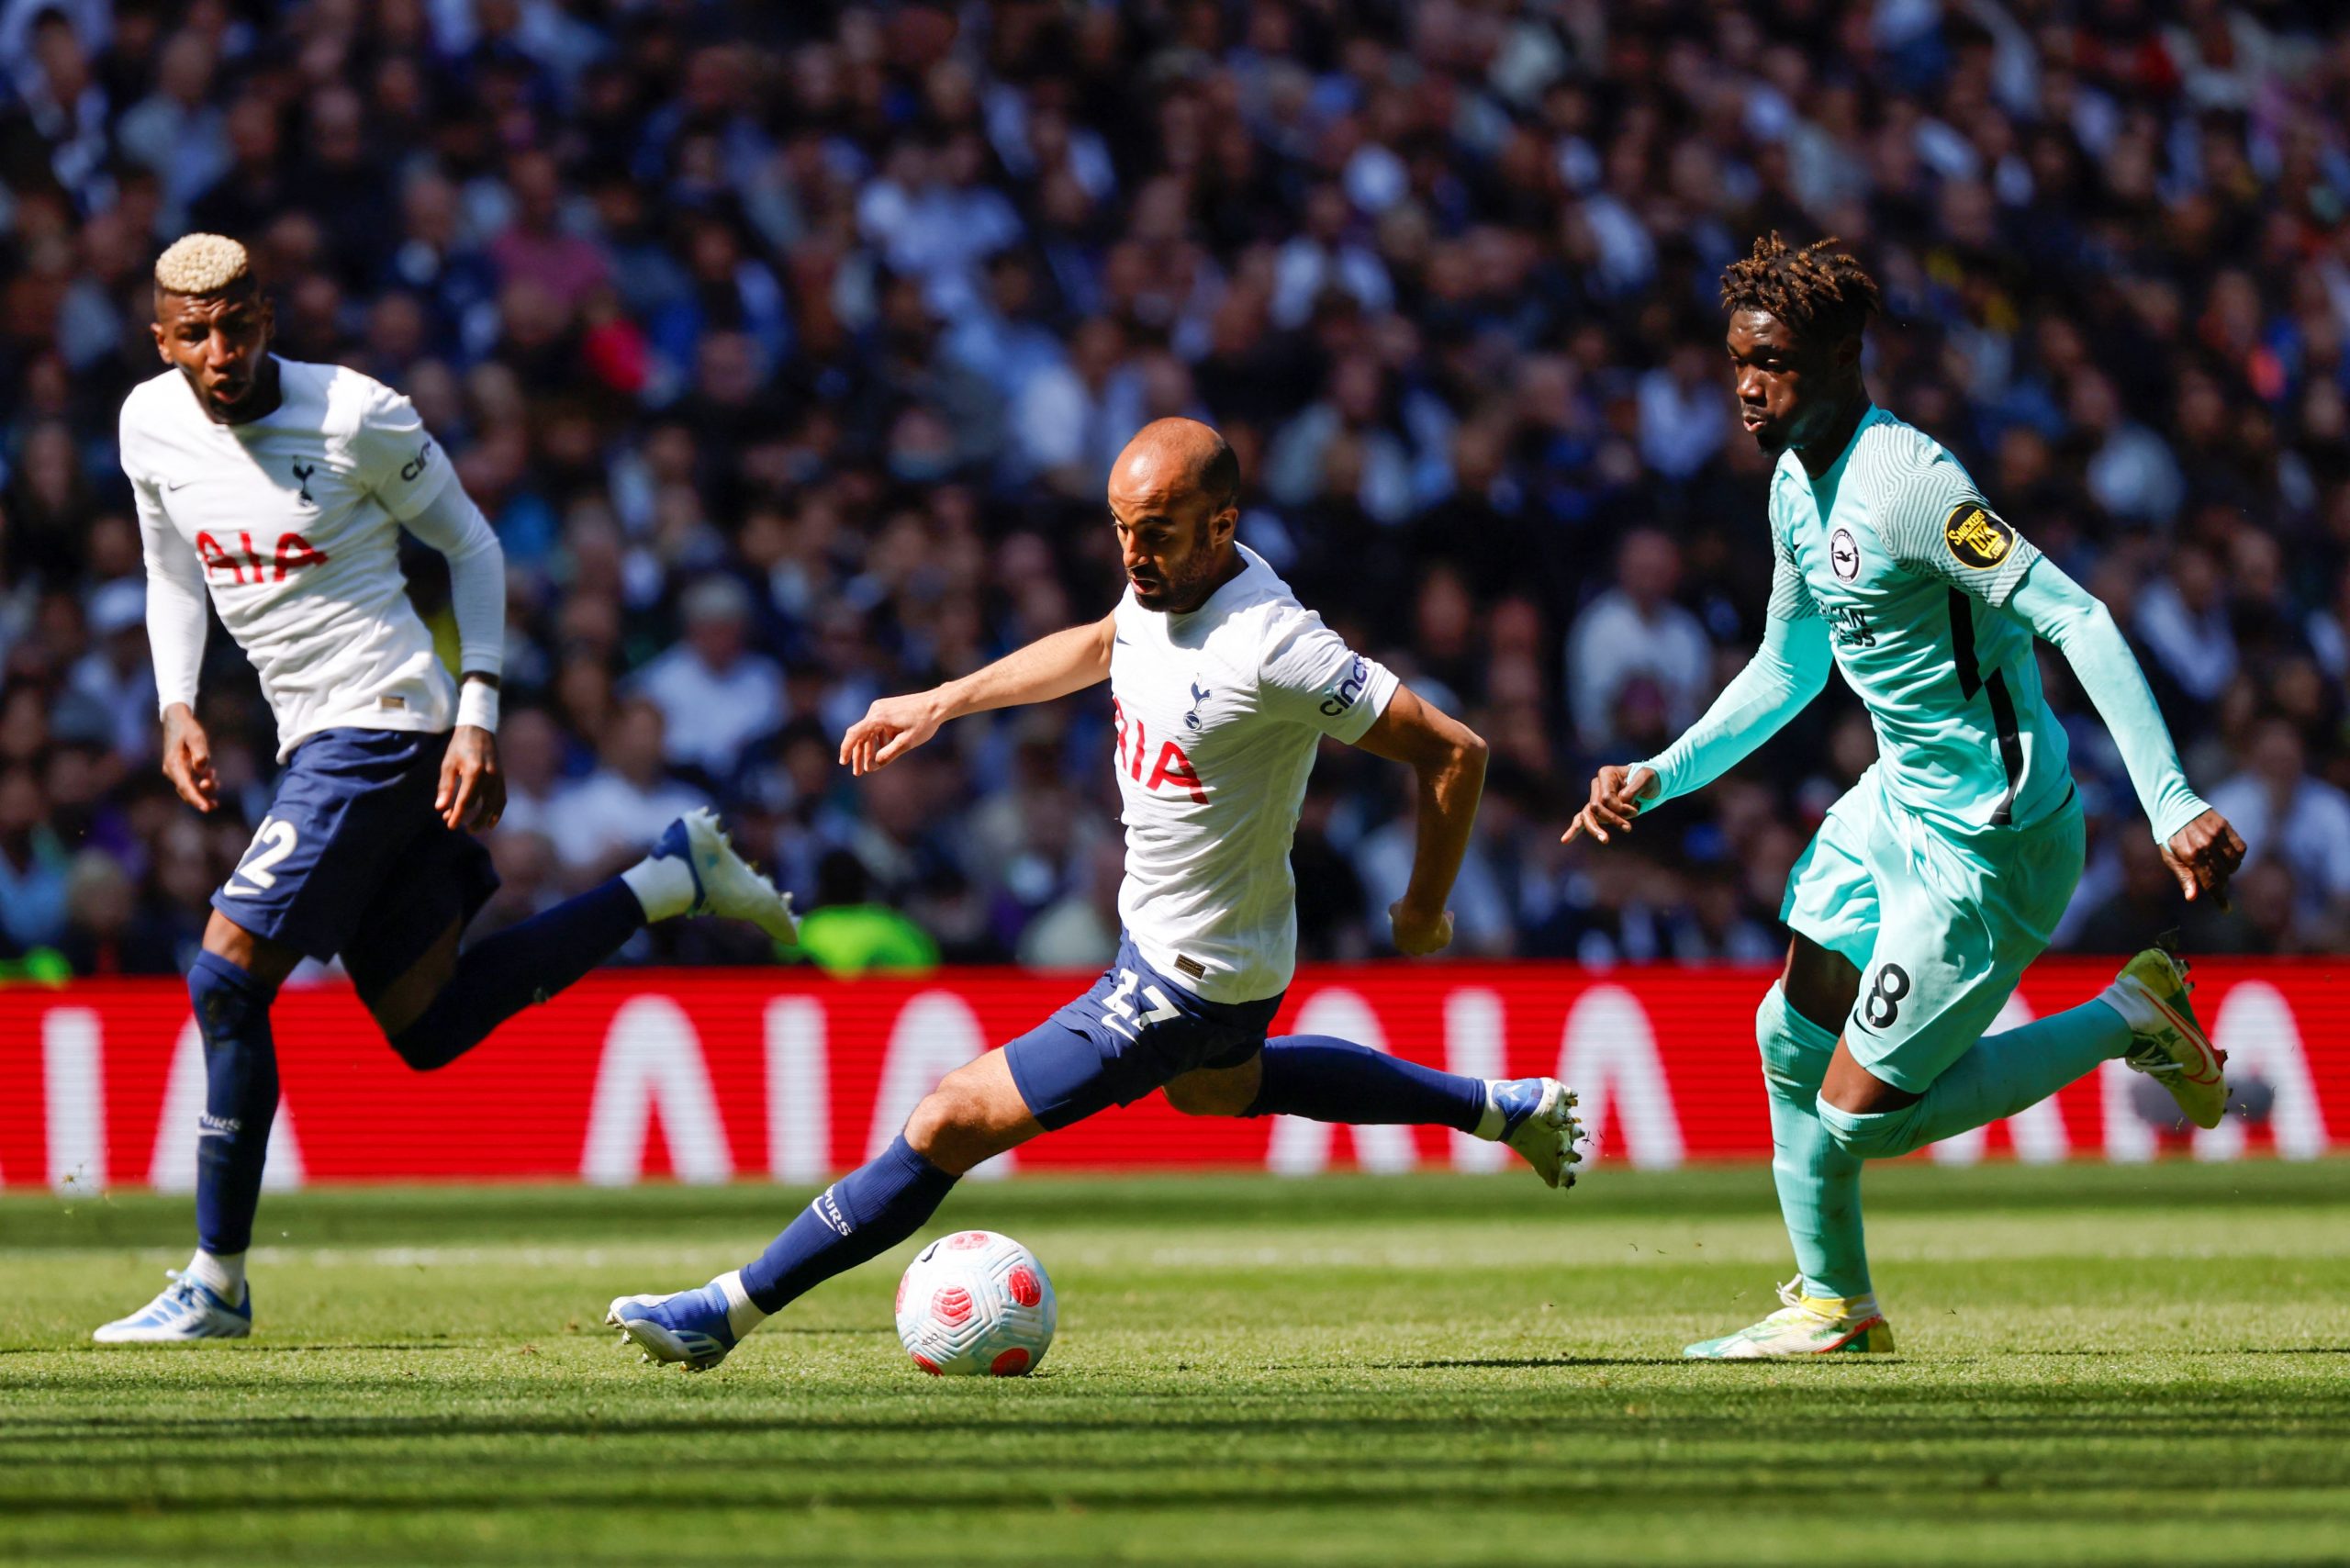 Lucas Moura wants to stay beyond this summer and fulfil his Tottenham Hotspur contract.